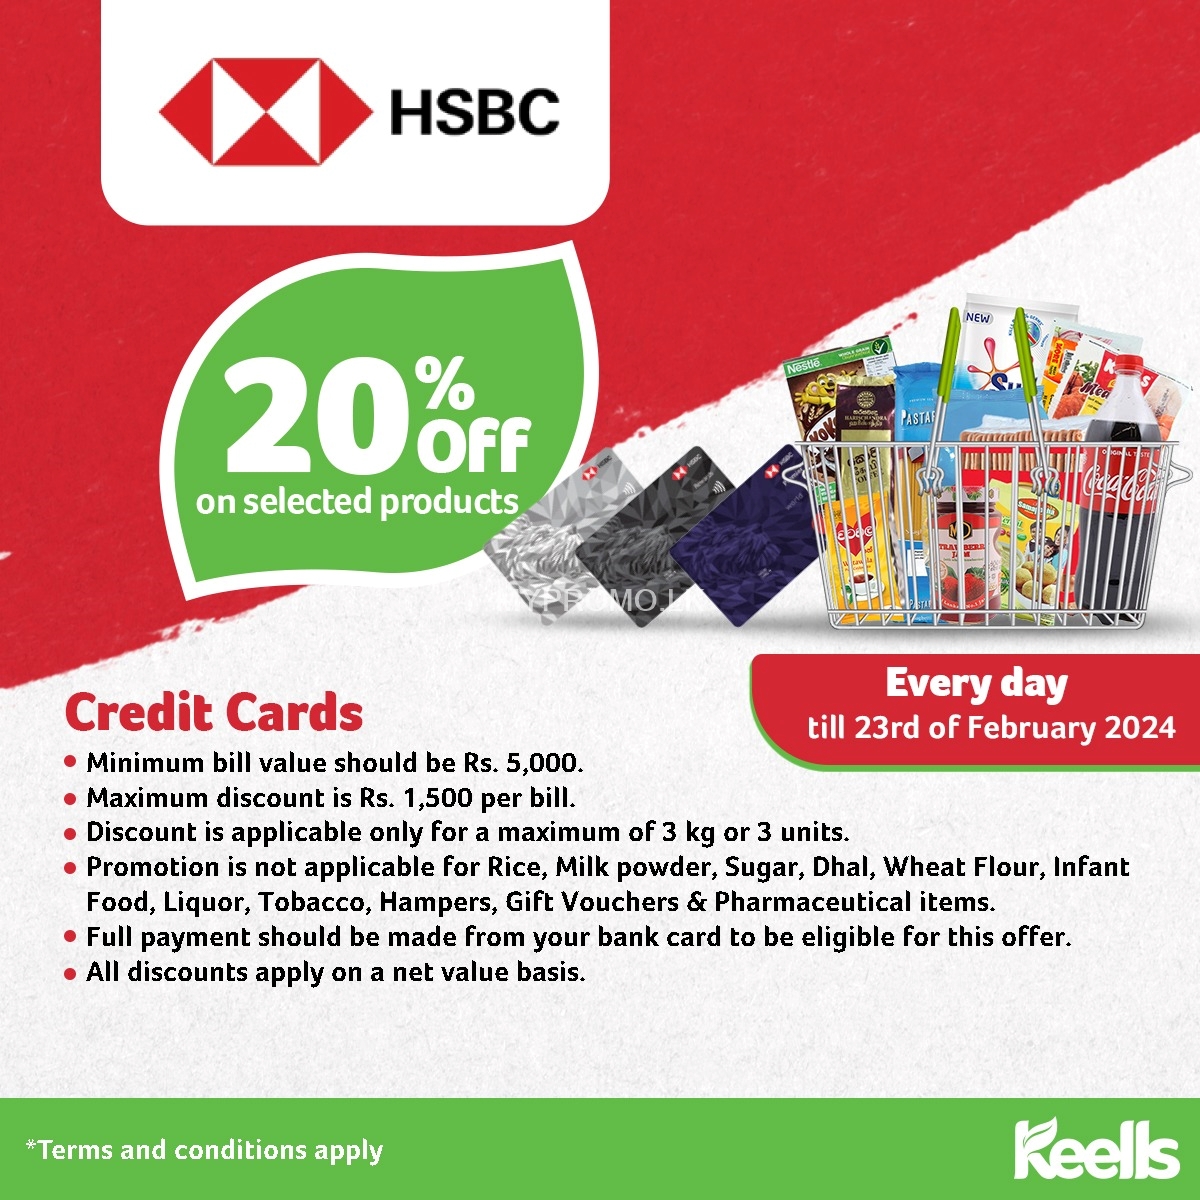 20% off on selected Products at Keells For HSBC Bank Credit Cards